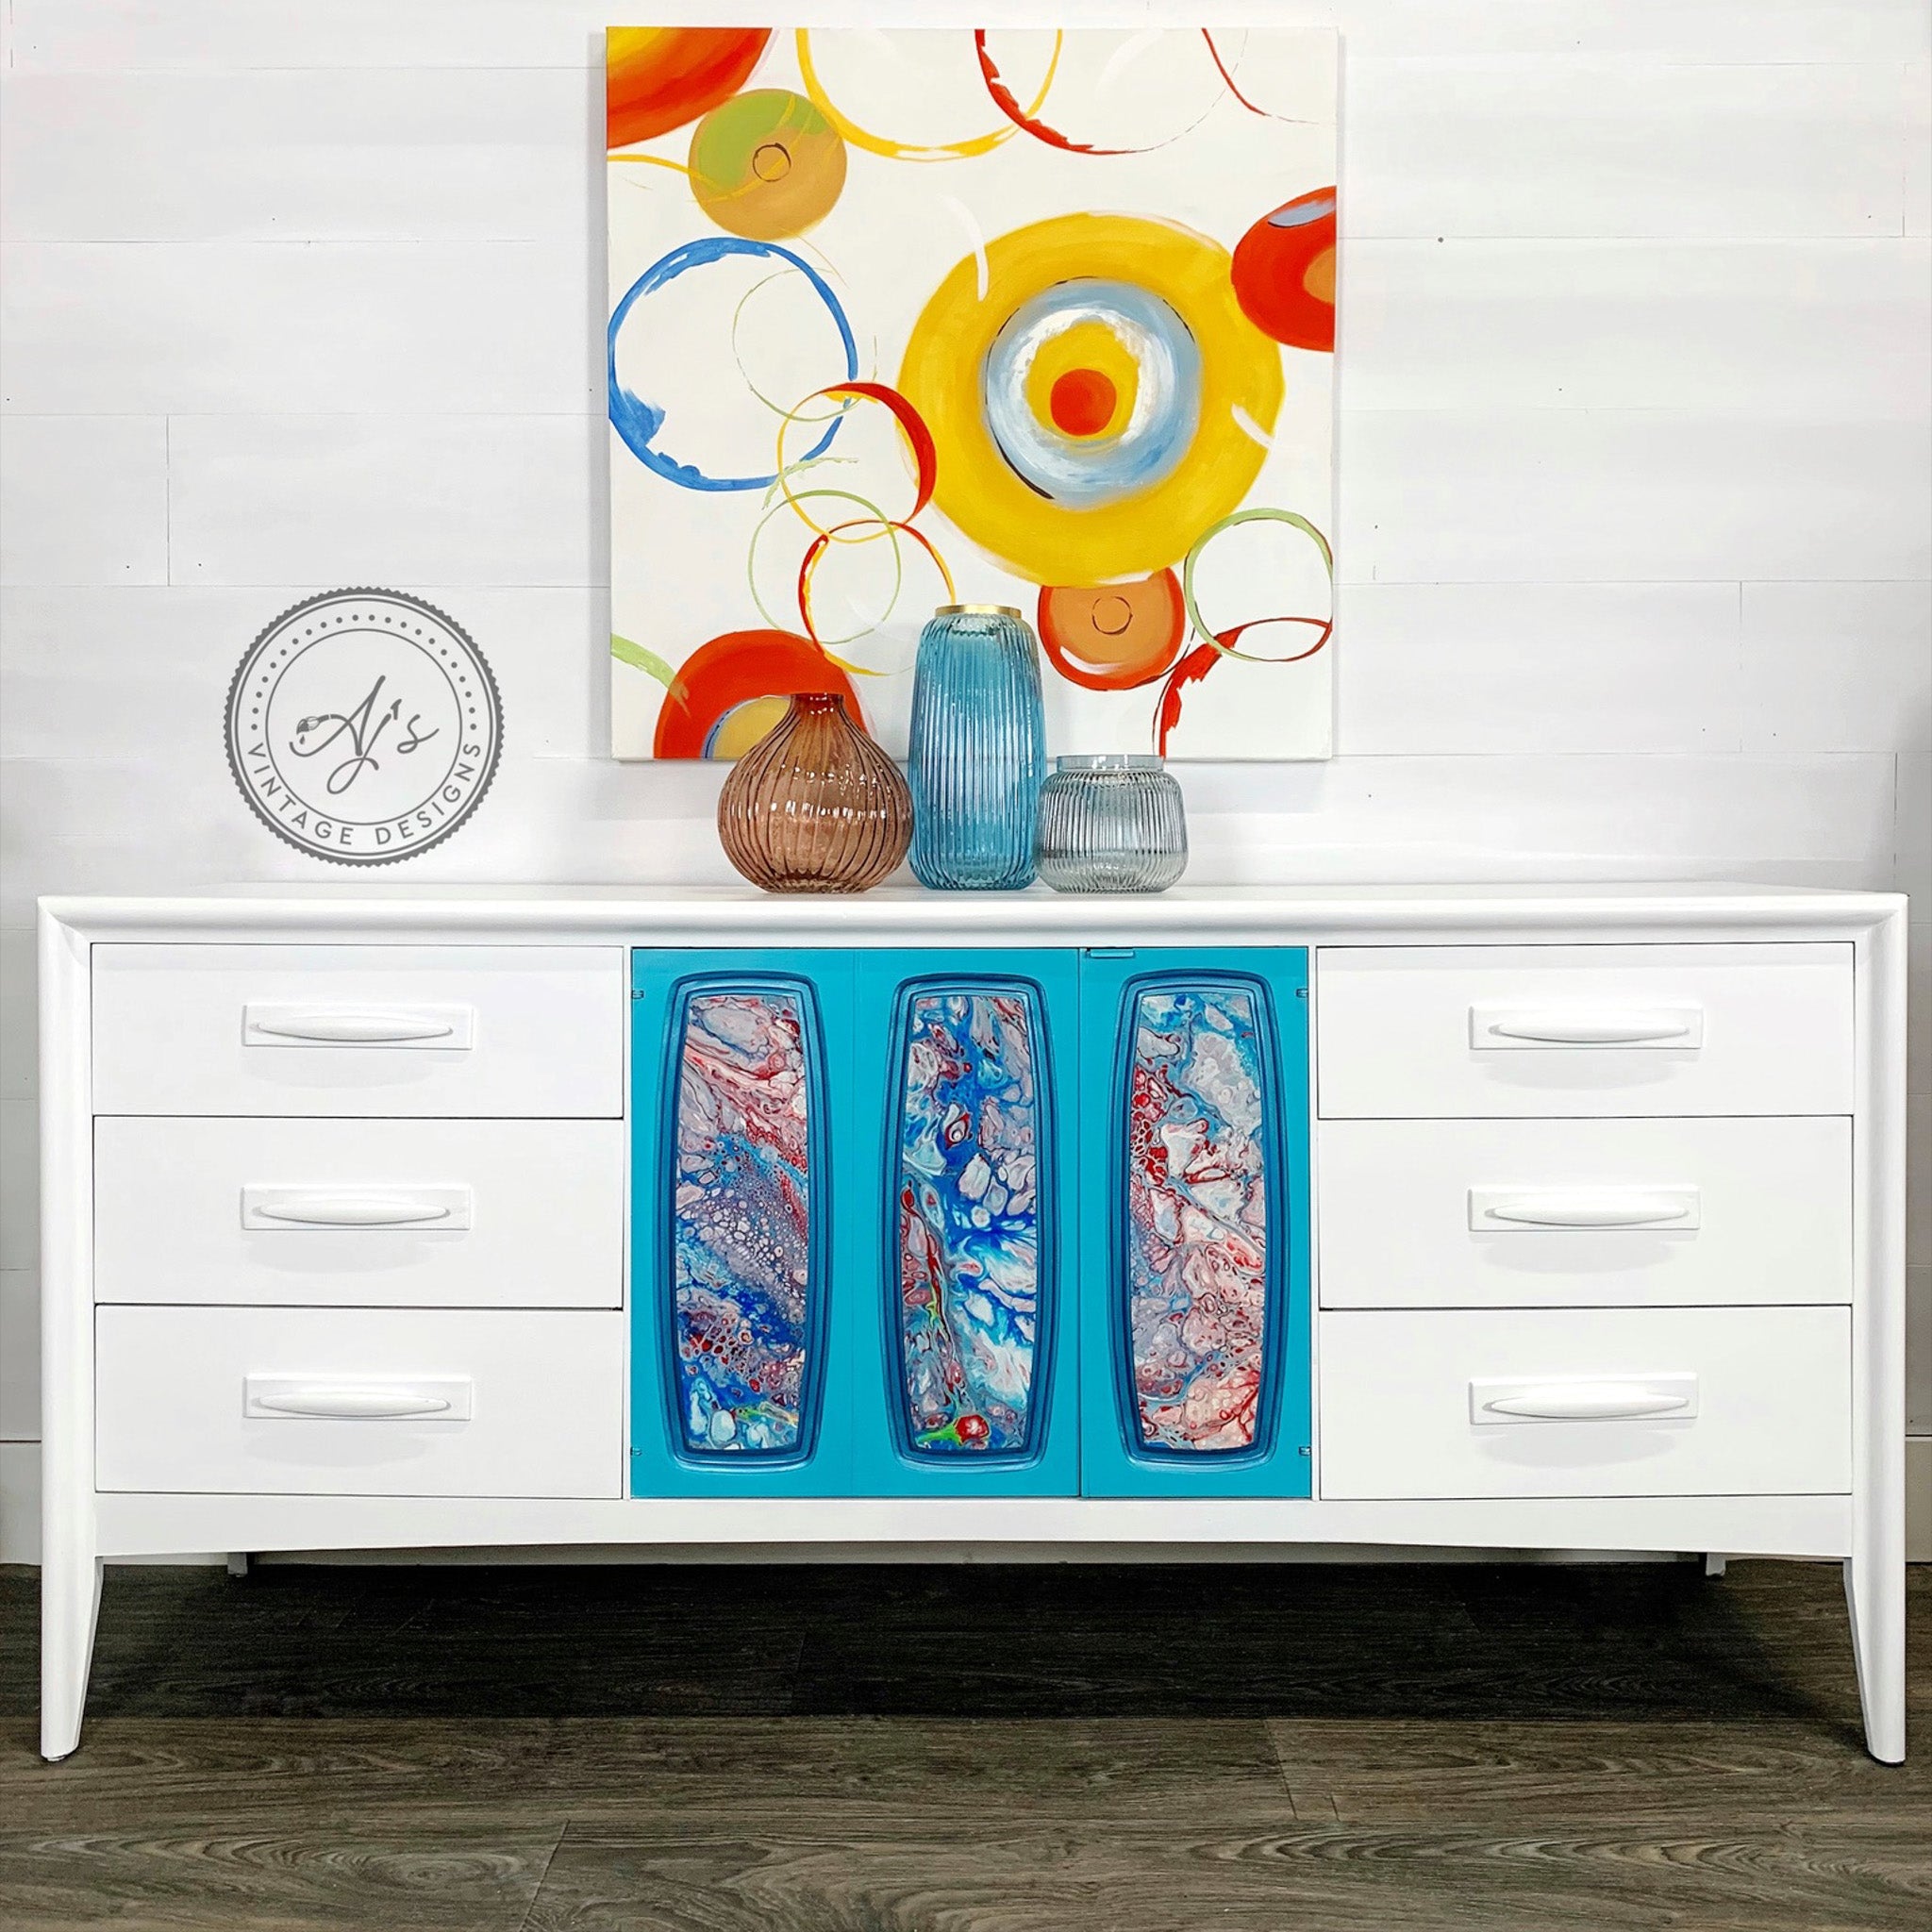 A vintage large dresser refurbished by Aj's Vintage Designs is painted in Dixie Belle's Cotton chalk mineral paint. The center of the dresser has a tri-fold door painted in sky blue with a blue and red marble design.